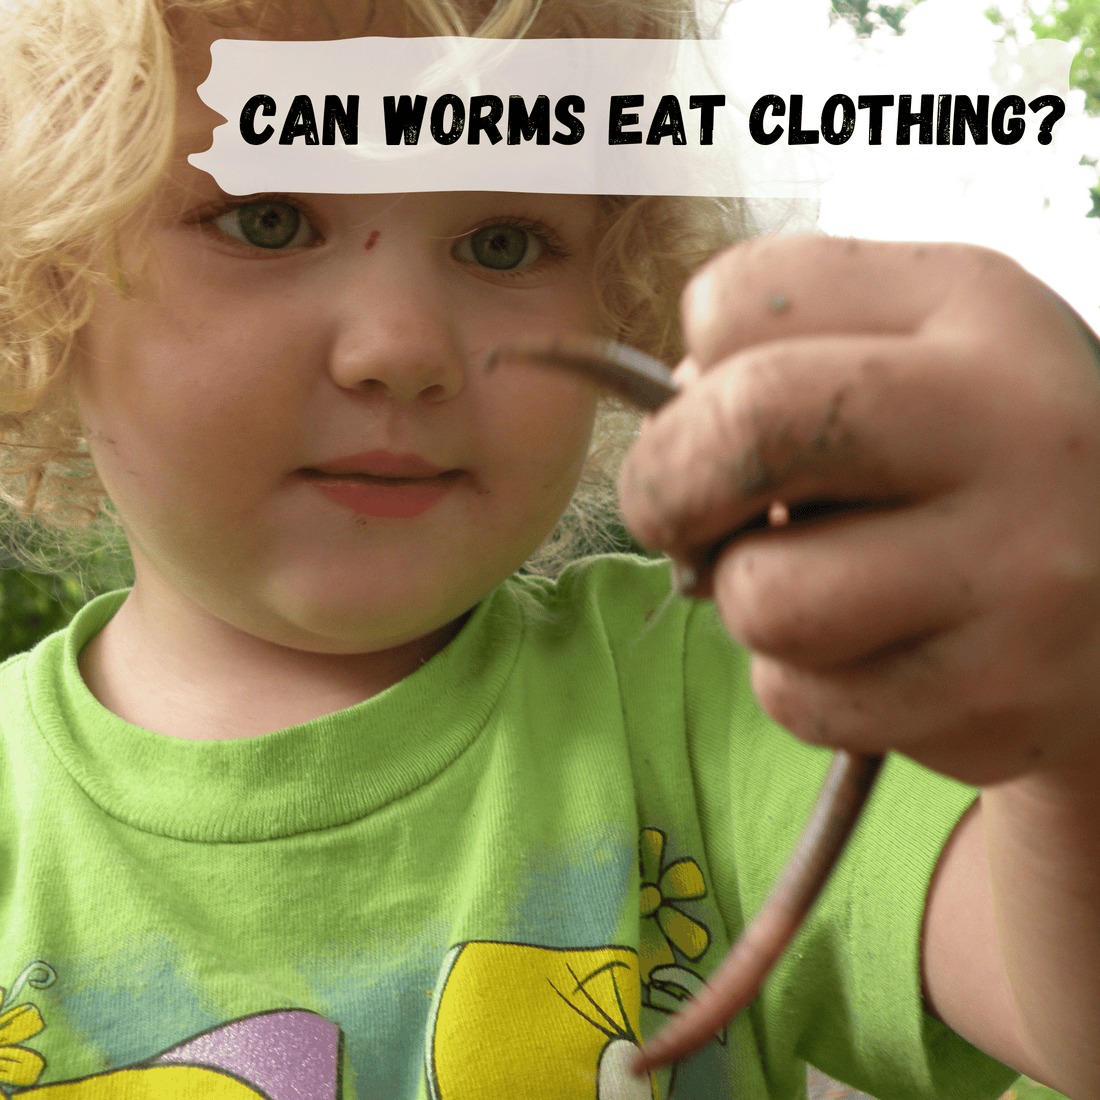 Can worms eat clothing?